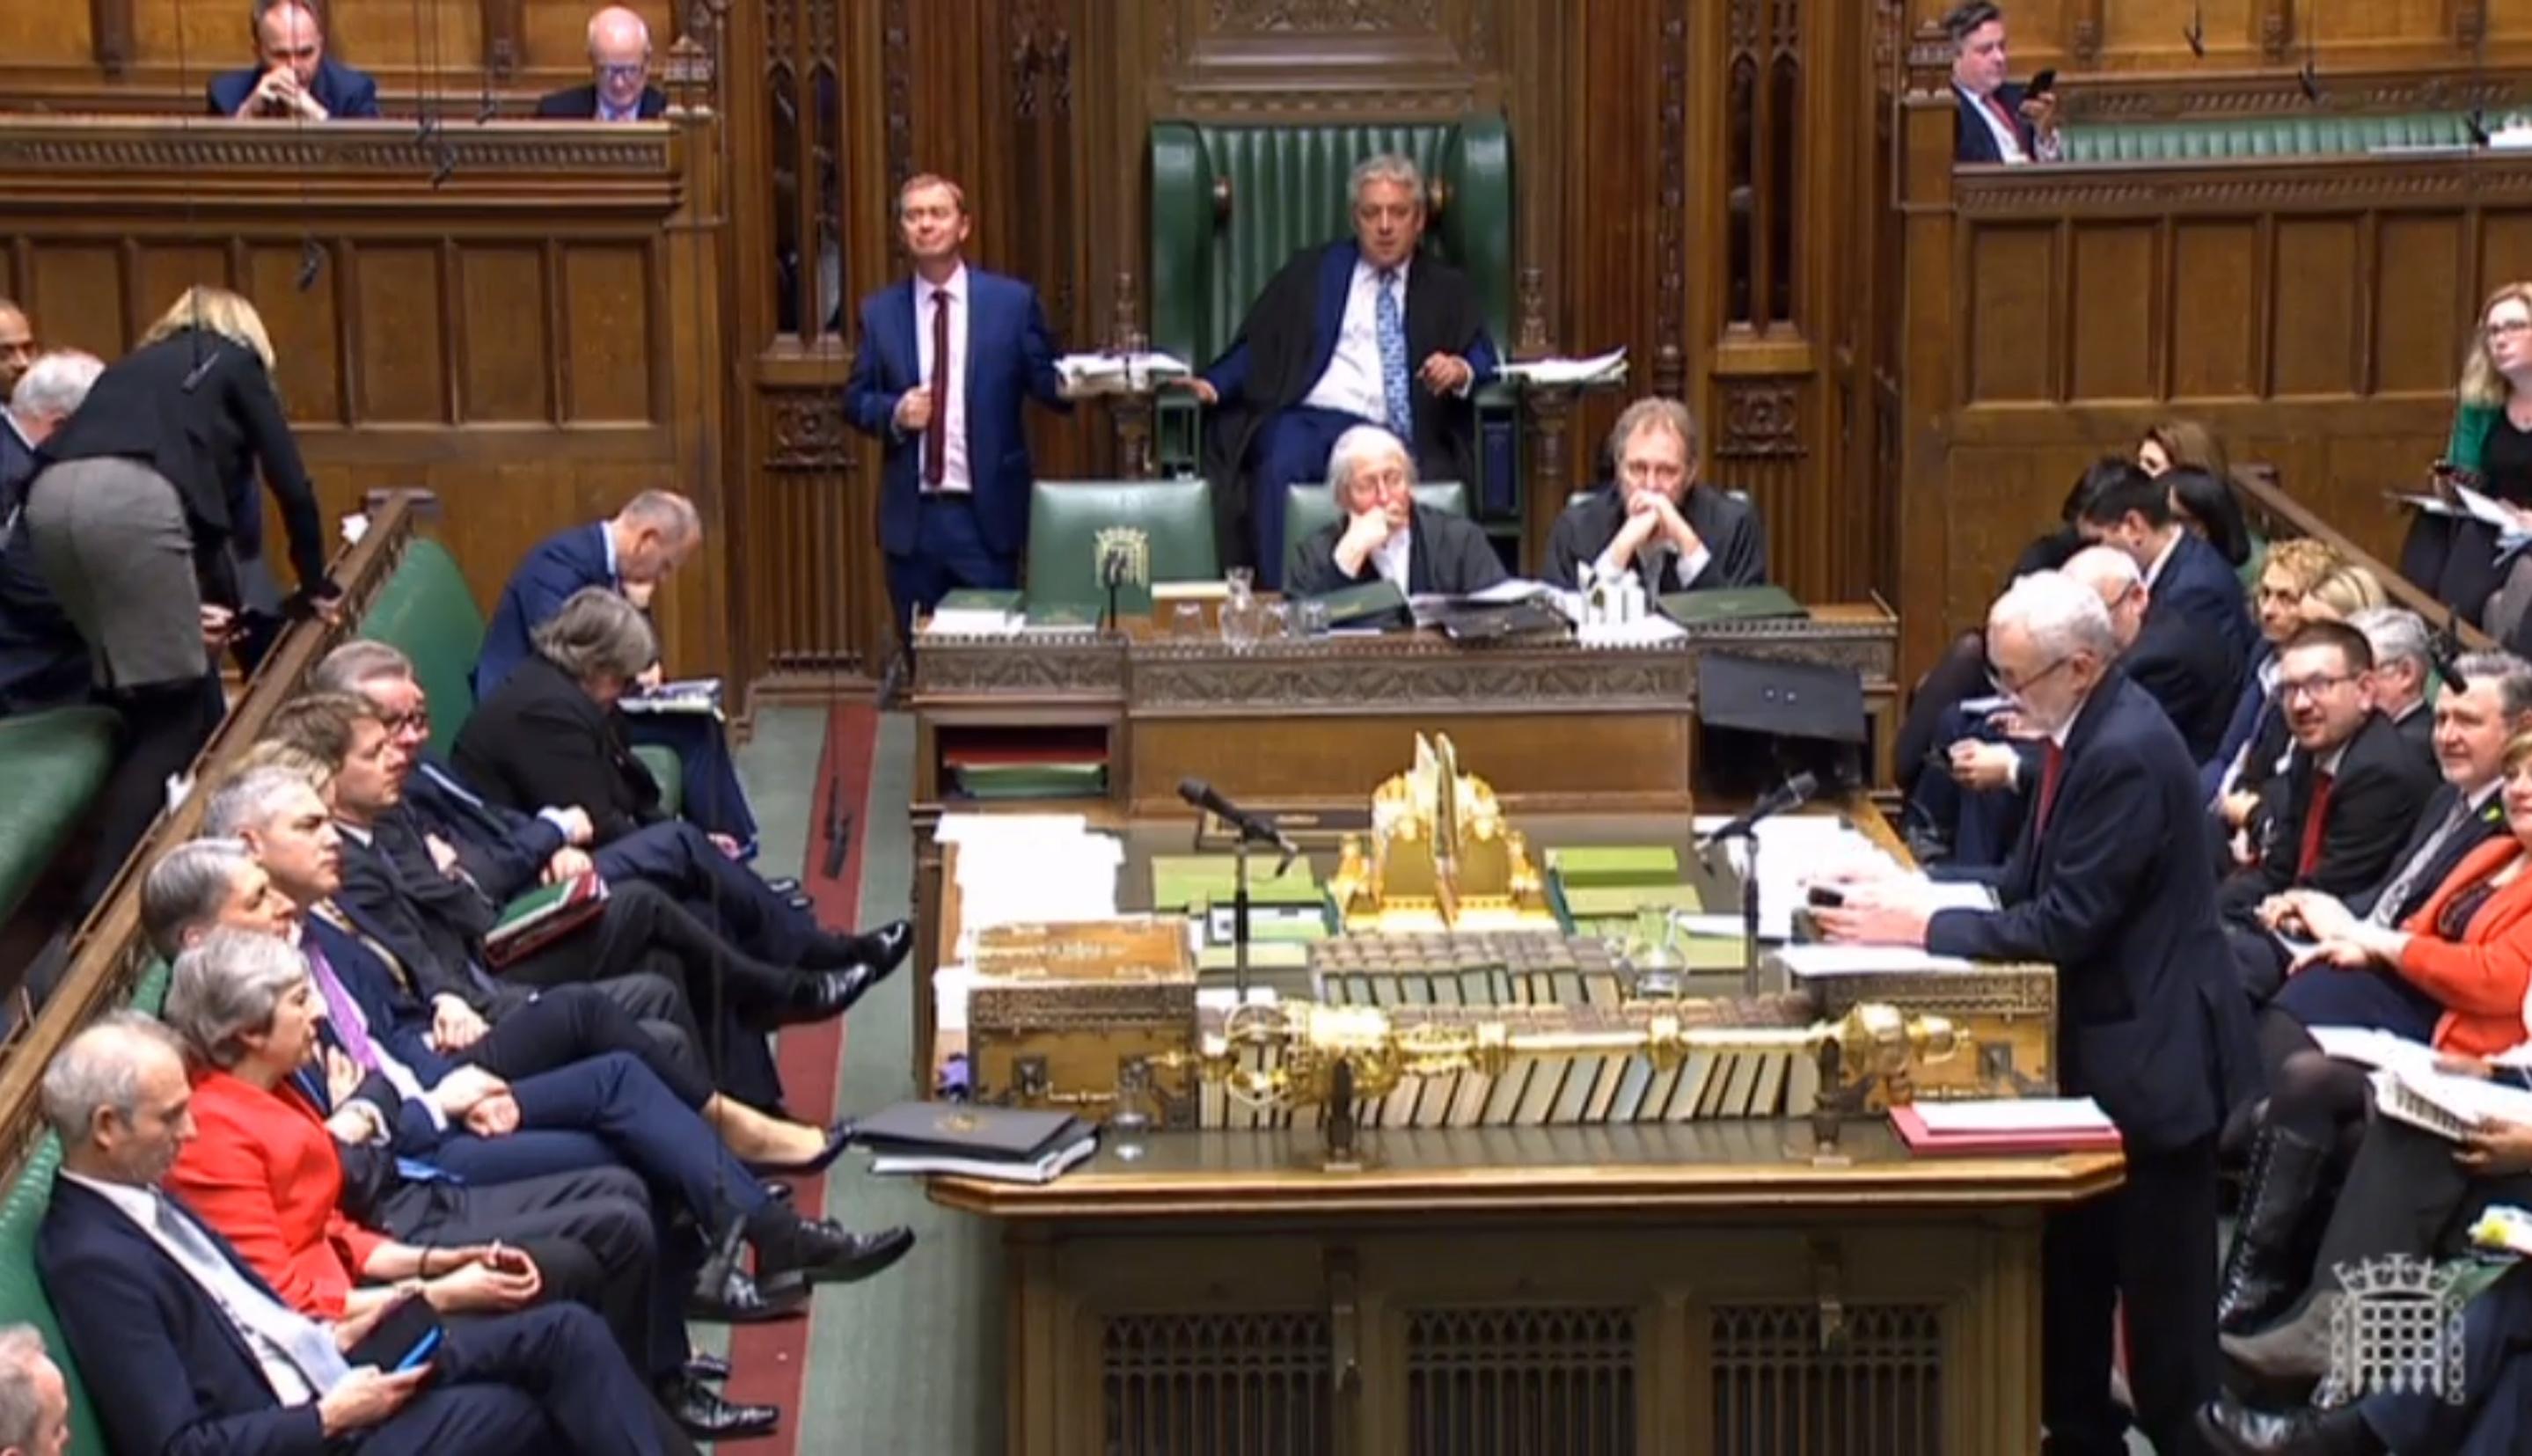 epa07431438 A grab from a handout video made available by the UK Parliamentary Recording Unit shows British opposition Labour party leader Jeremy Corbyn (R) speaks during a debate at the House of Commons parliament in London, Britain, 12 March 2019. British parliament will vote on British Prime Minister May's amended Brexit deal later in the day. Theresa May wants parliament to back her 'improved' withdrawal agreement she has negotiated with the EU over the so-called 'backstop'. The United Kingdom is officially due to leave the European Union on 29 March 2019, two years after triggering Article 50 in consequence to a referendum.  EPA/UK PARLIAMENTARY RECORDING UNIT / HANDOUT MANDATORY CREDIT: UK PARLIAMENTARY RECORDING UNIT HANDOUT EDITORIAL USE ONLY/NO SALES